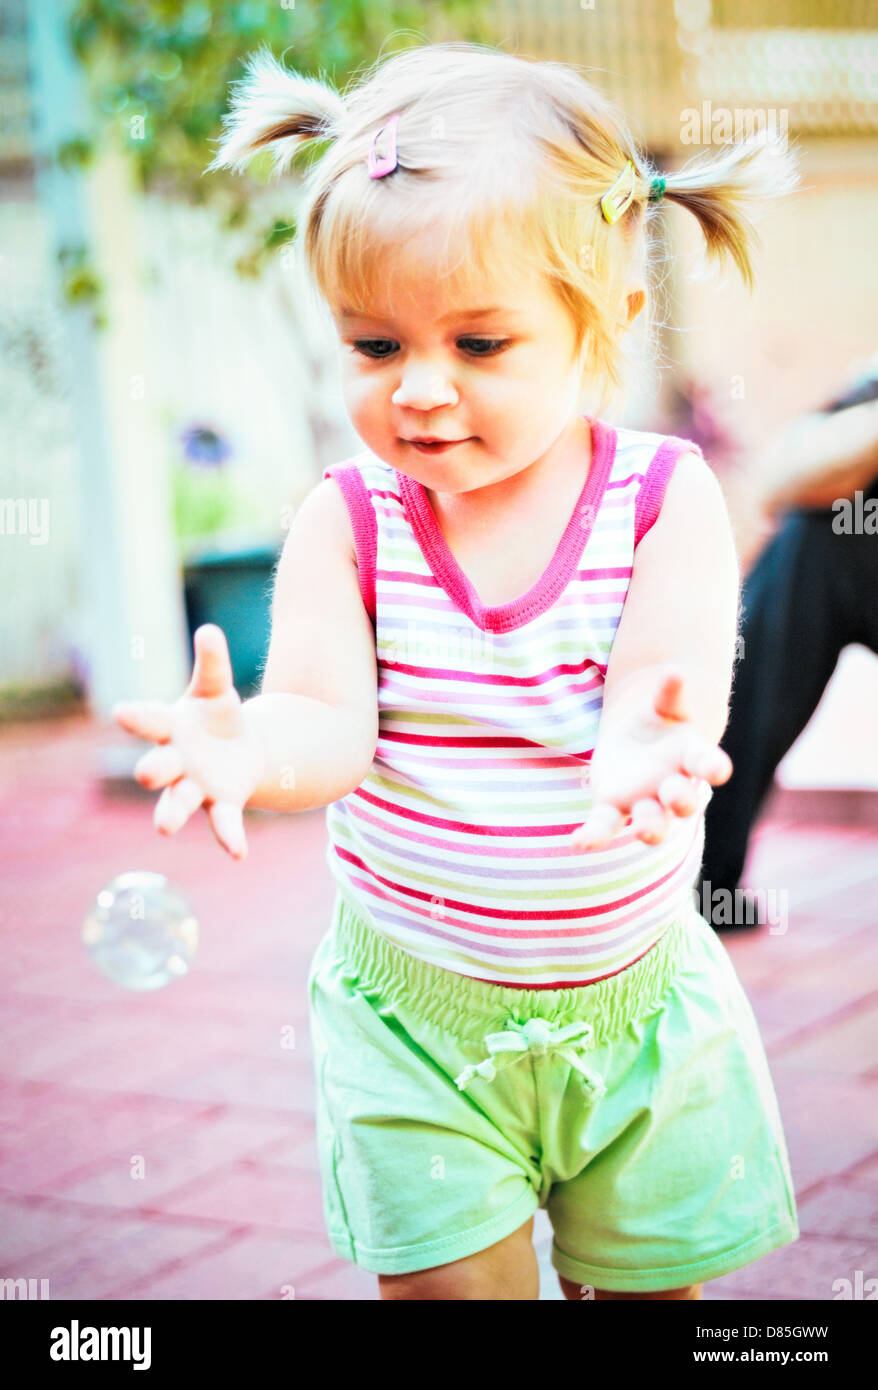 Little girl toddler chasing soap bubble Stock Photo